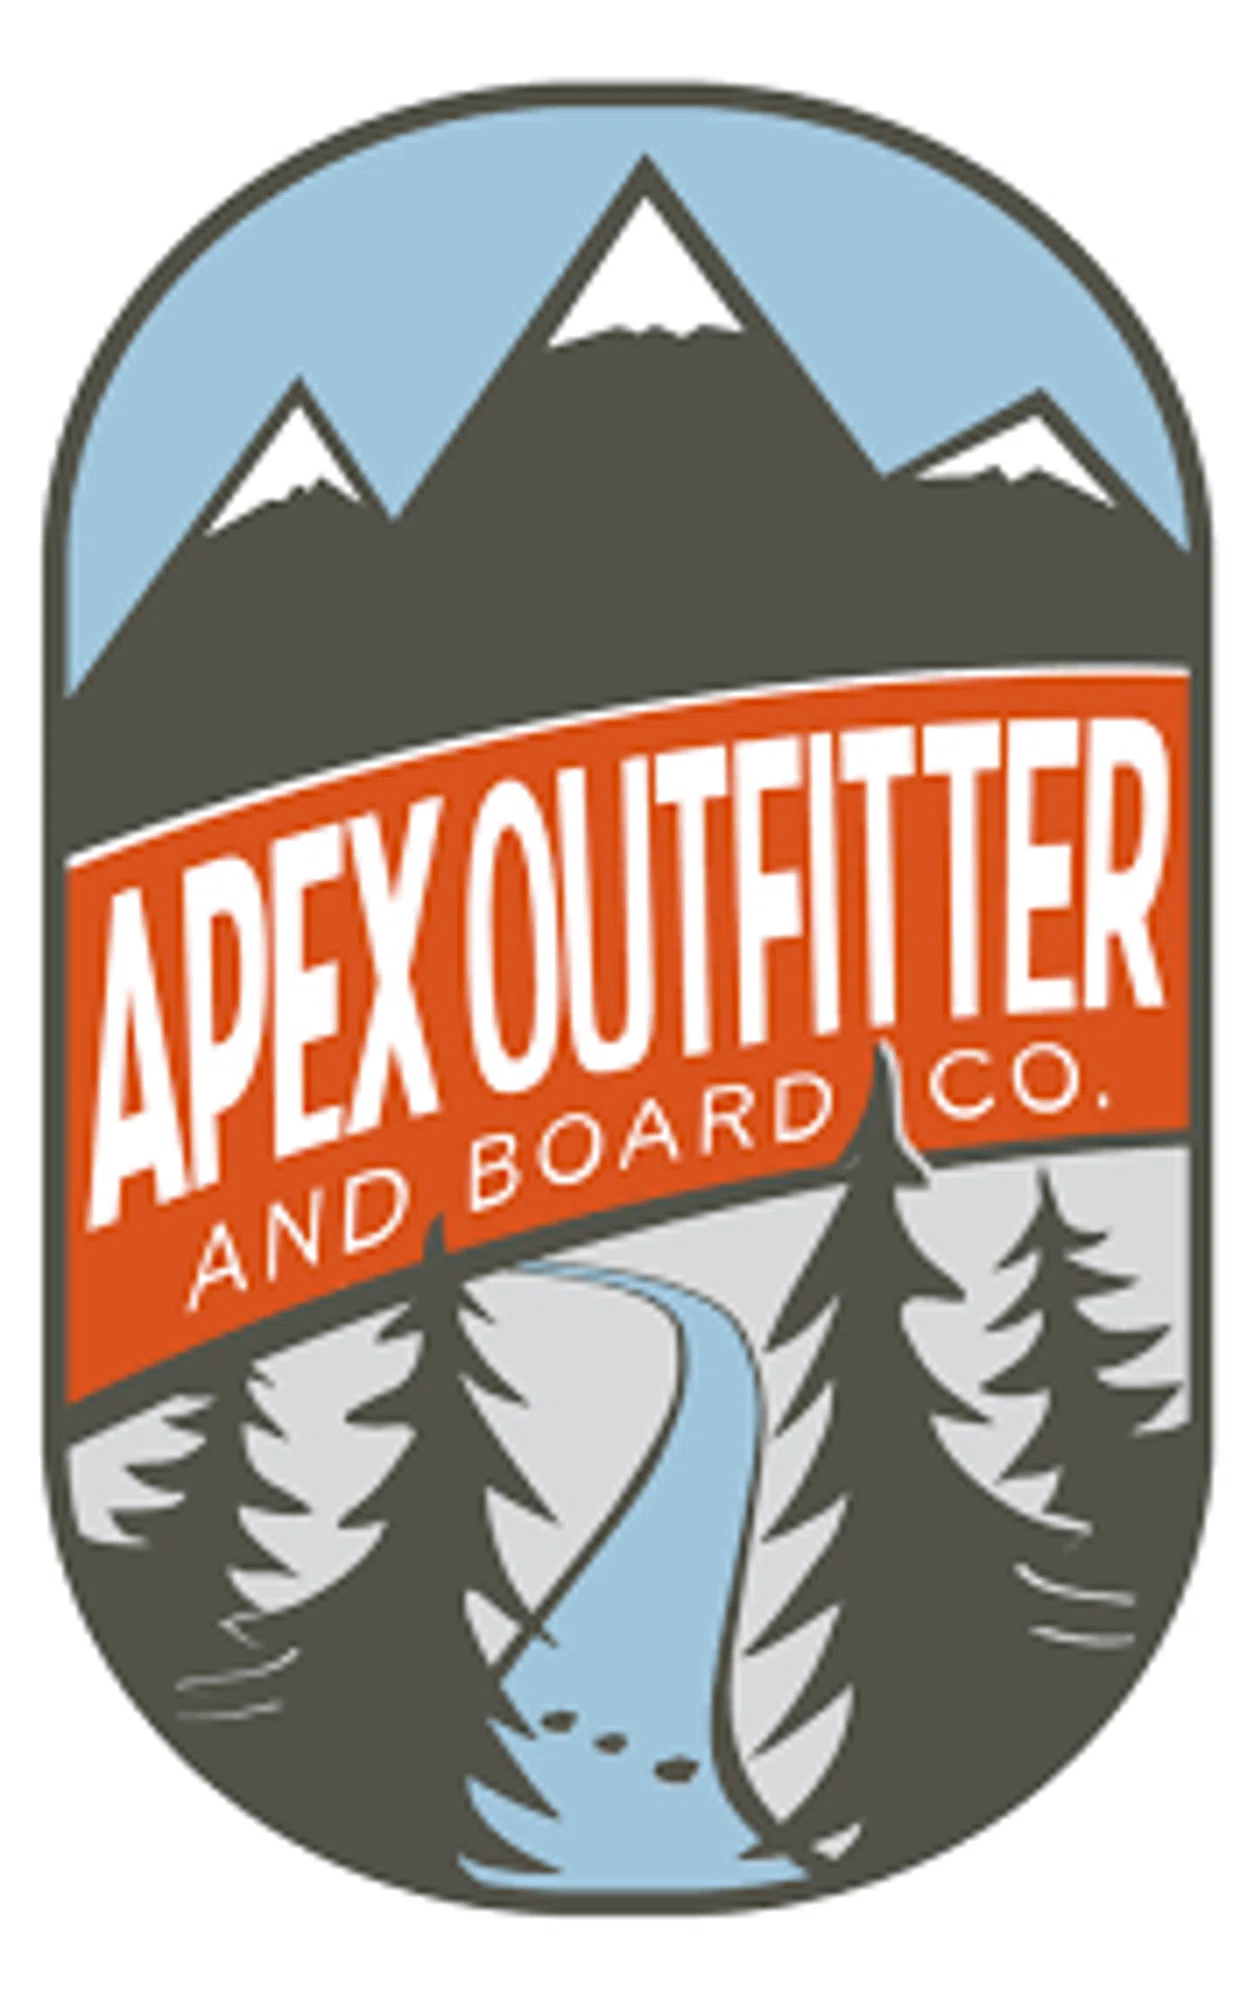 Apex Outfitter & Board Co